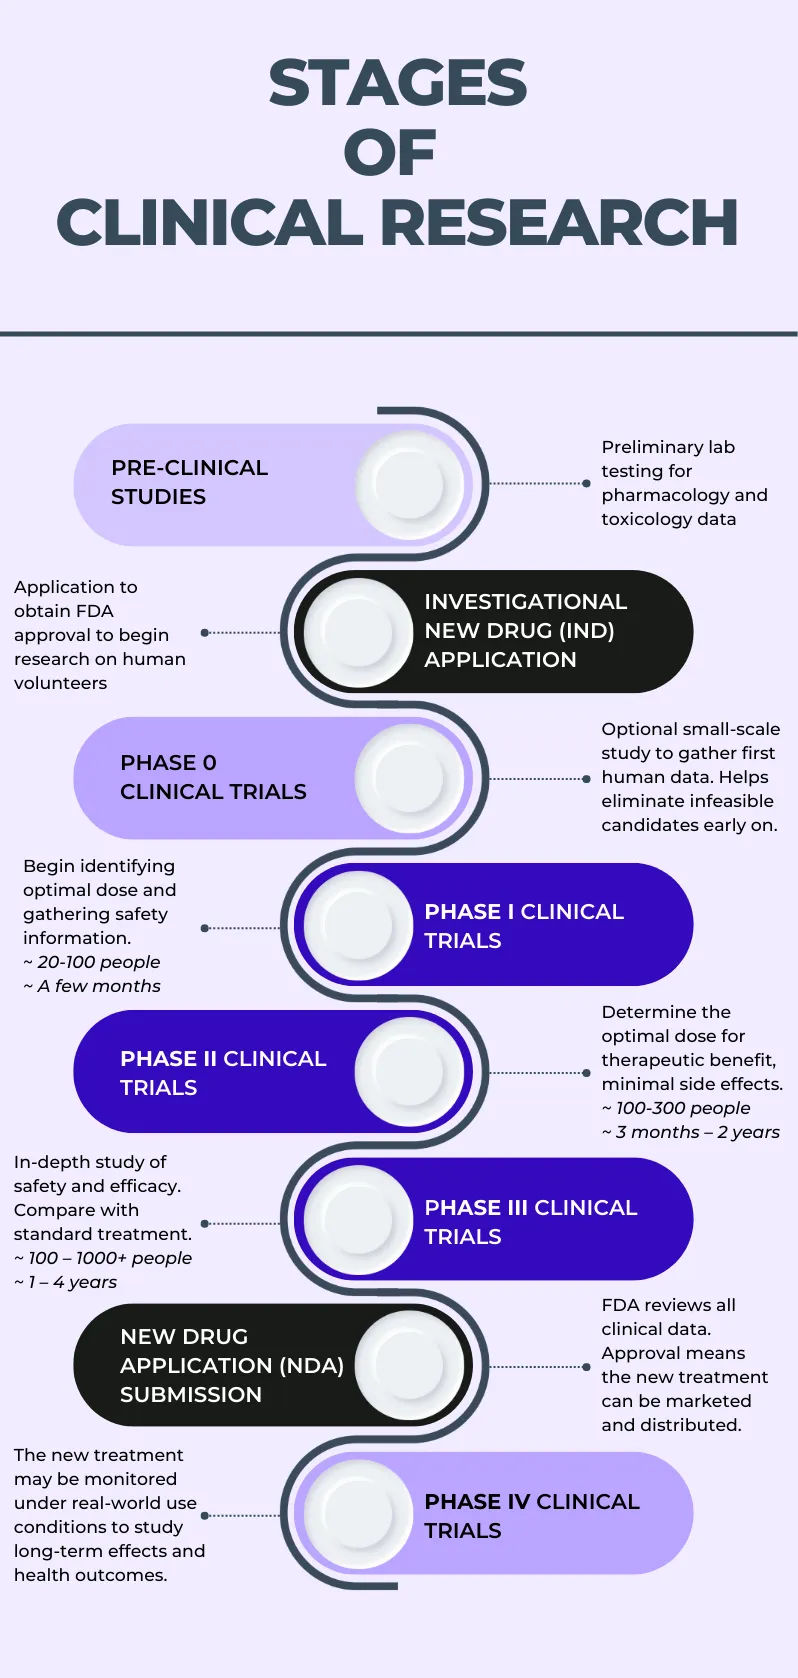 Stages of clinical research